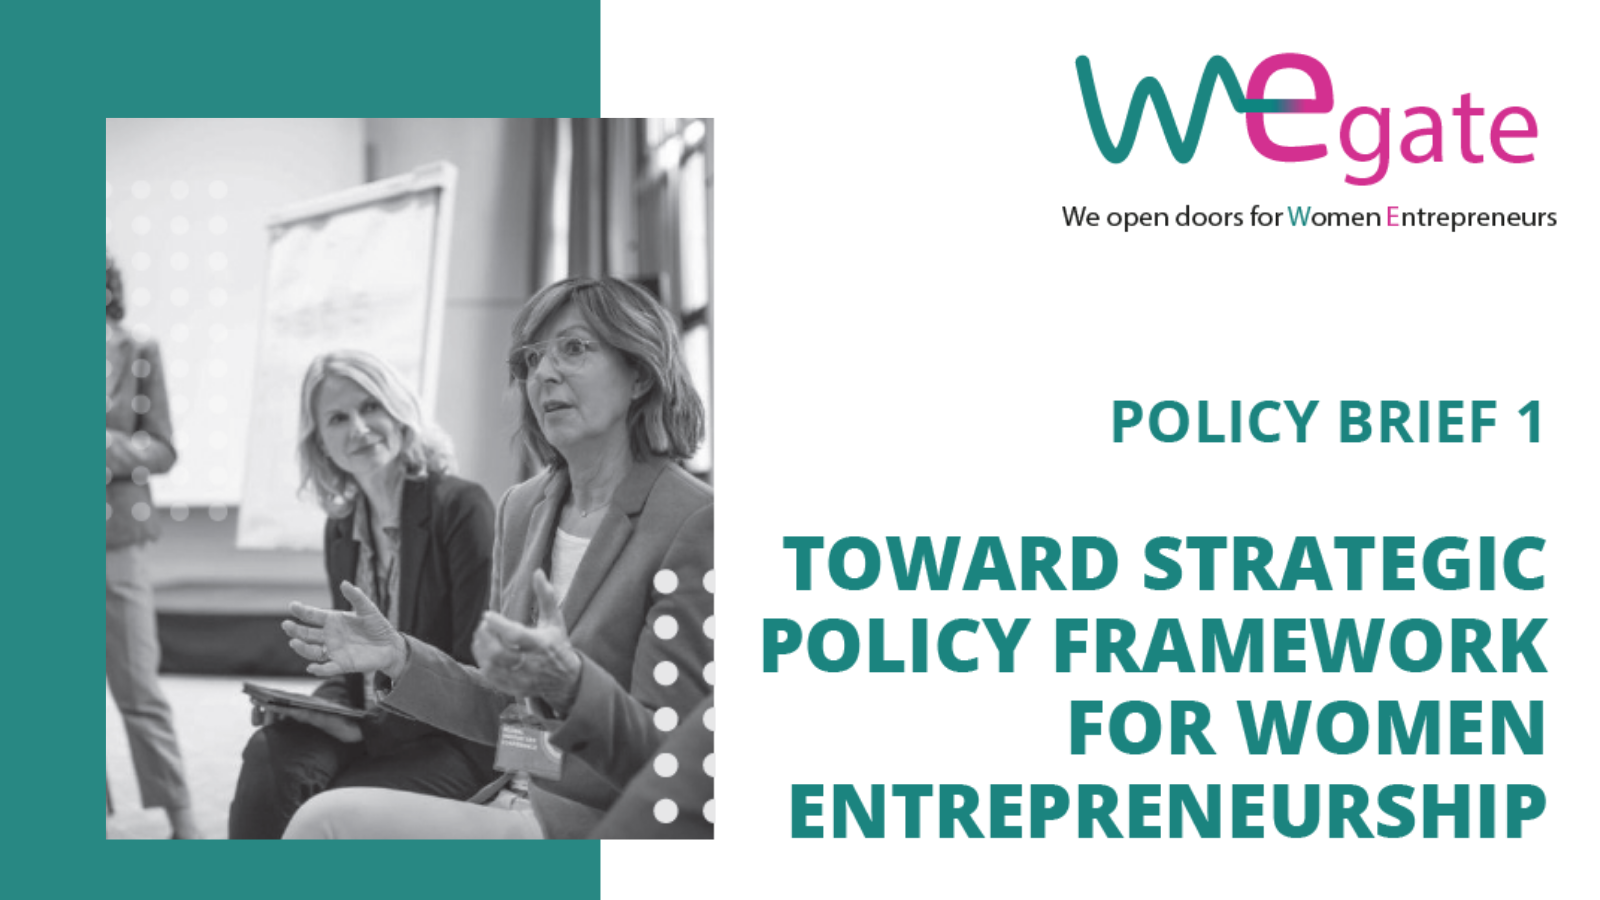 Image by WEgate presenting title of the policy brief on women entrepreneurship